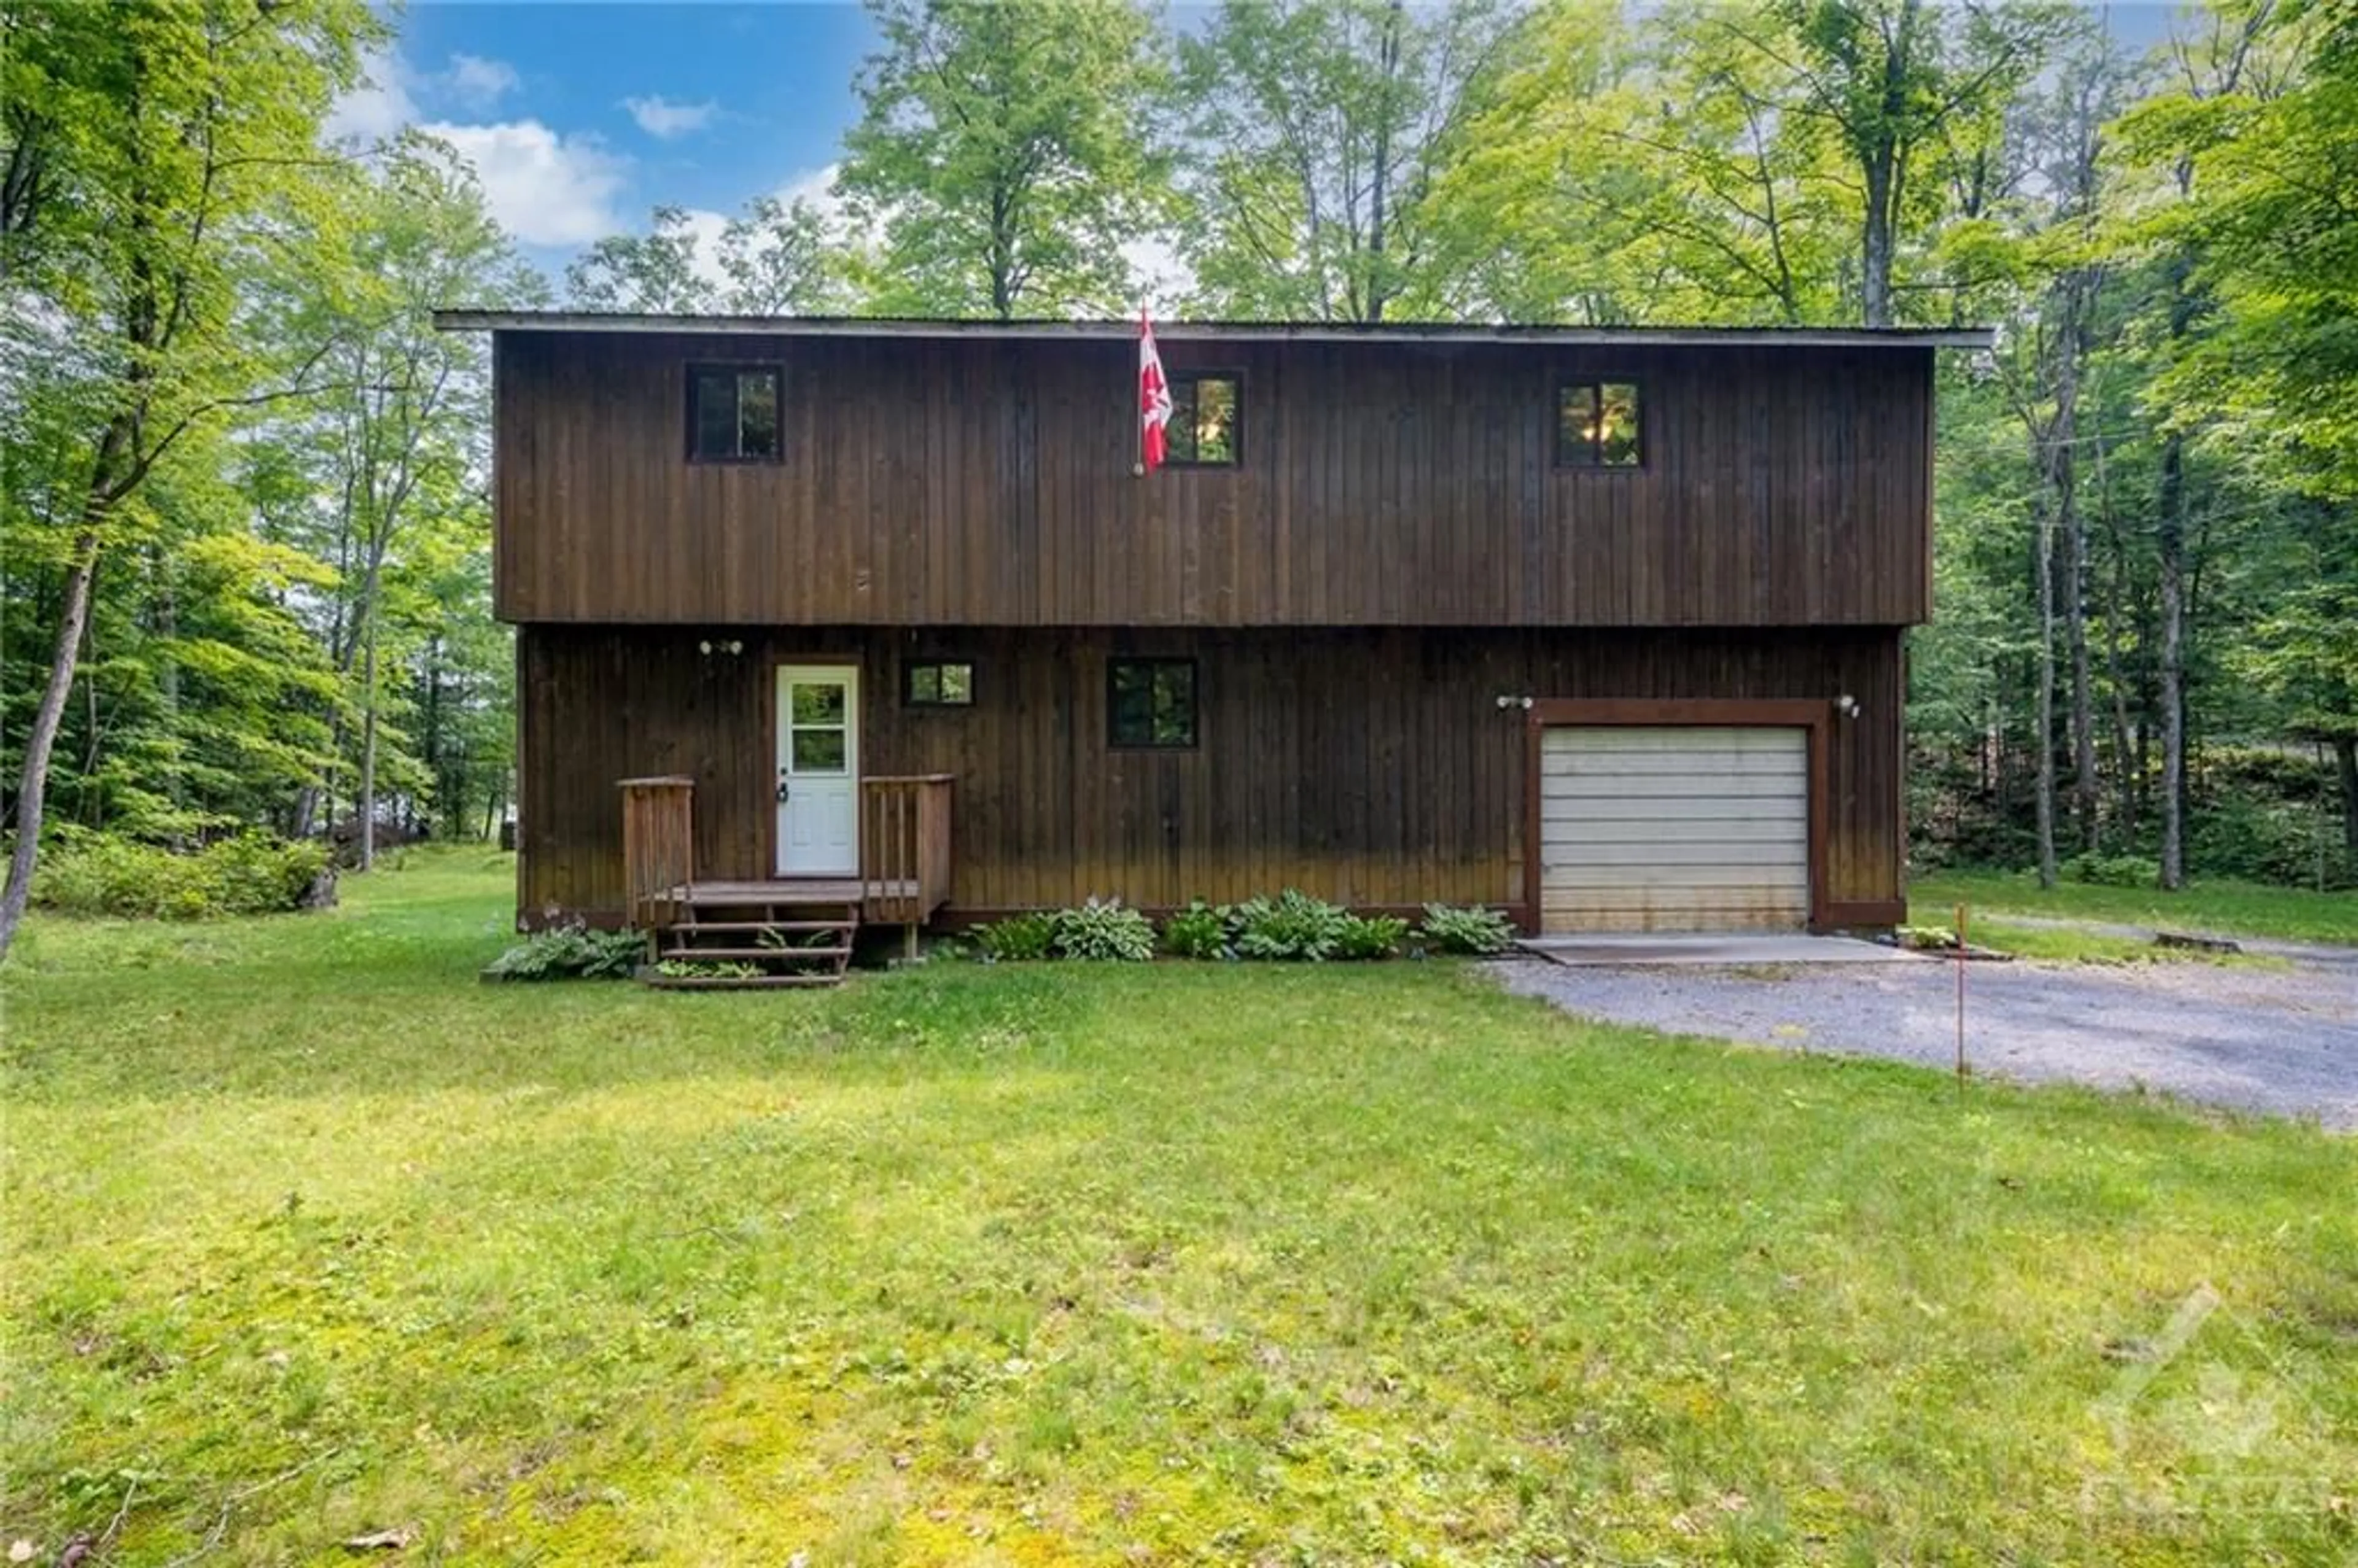 Home with unknown exterior material for 1069 QUINN Lane, Sharbot Lake Ontario K0H 2P0